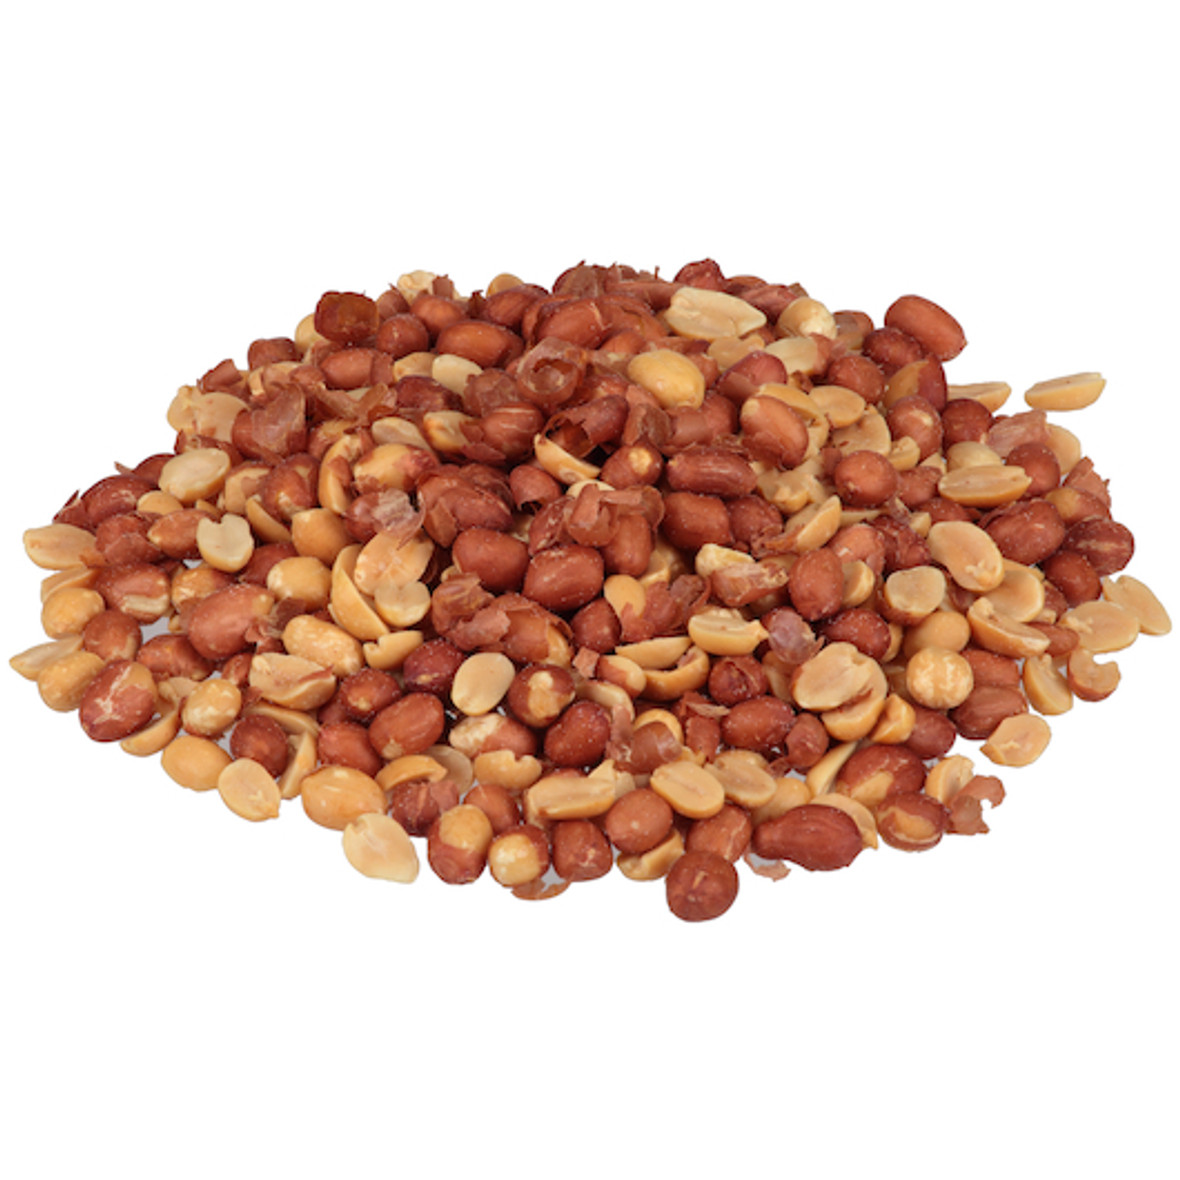 Fisher Roasted Spanish Peanuts Salted, 5 Pound